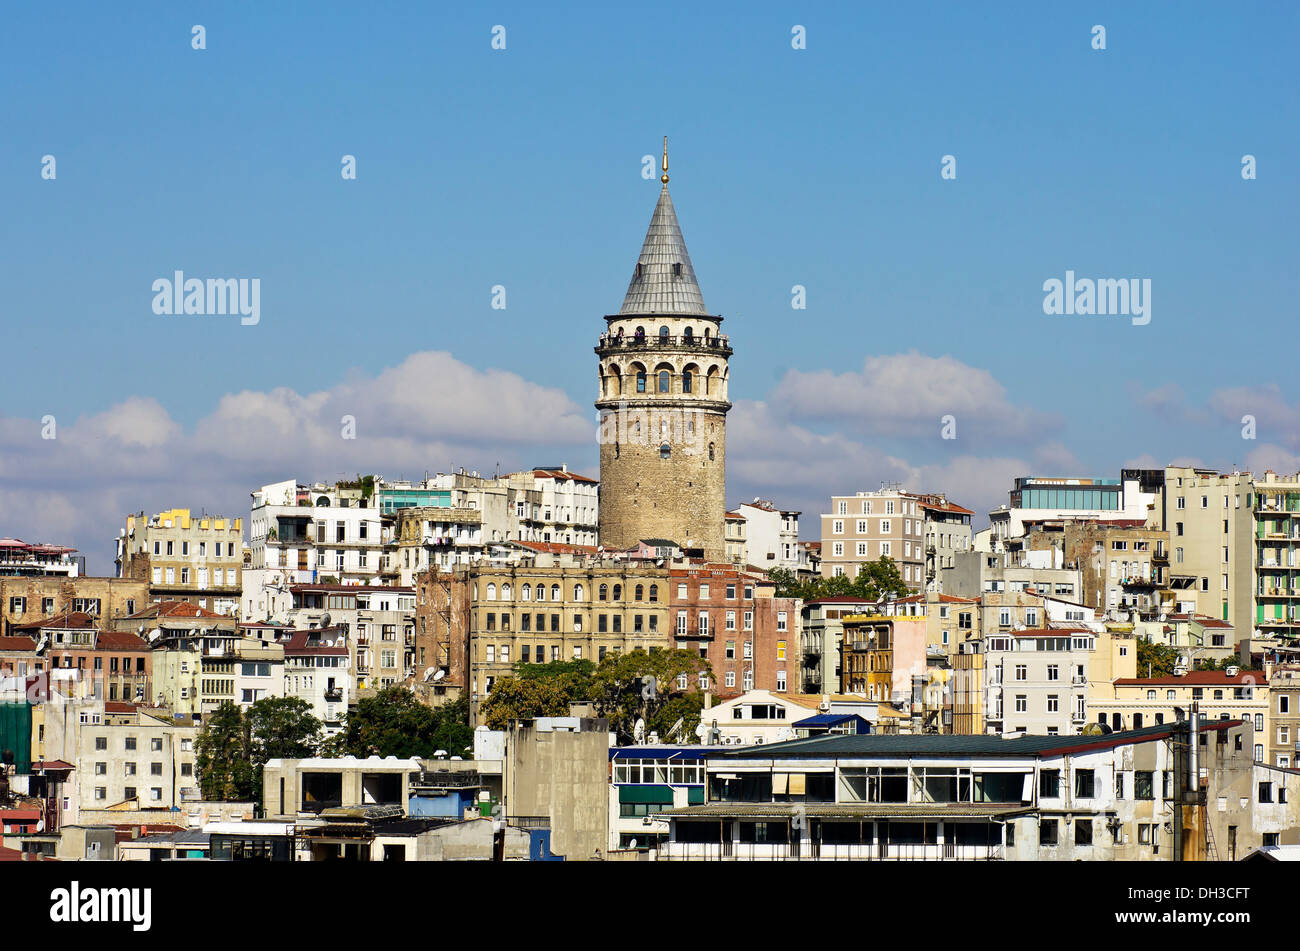 View of the Galata Tower, Beyoglu district, Istanbul, Turkey, Middle East Stock Photo